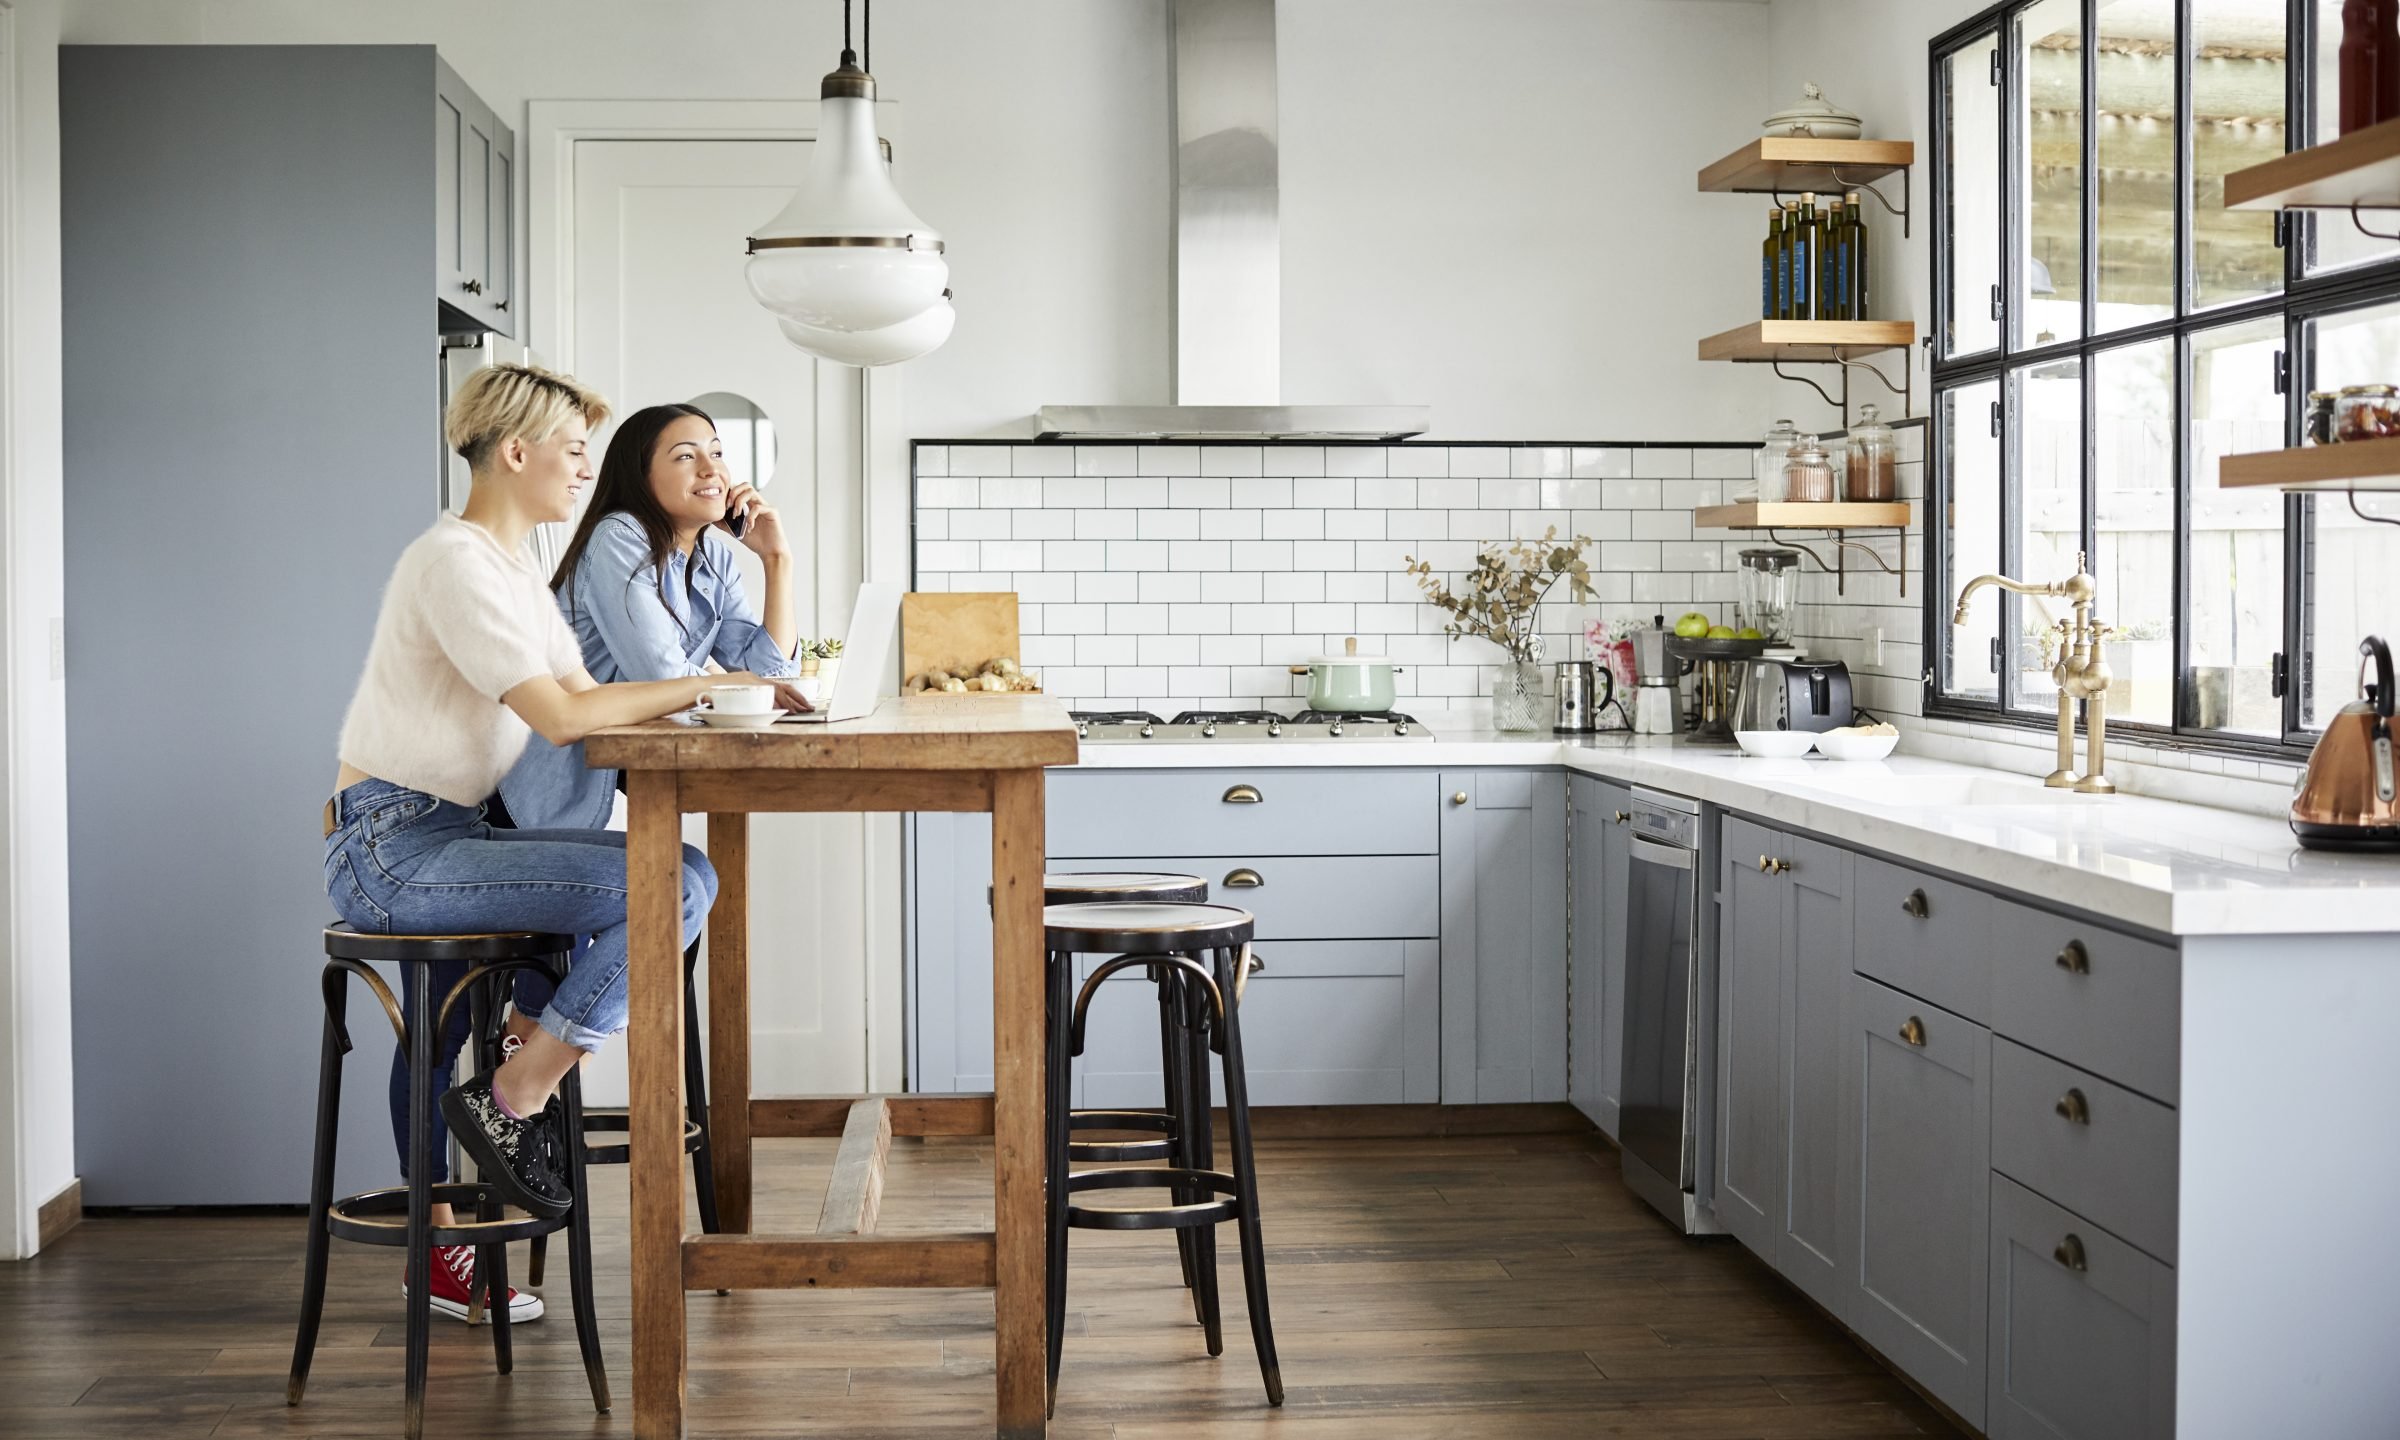 White Kitchens Can Hurt Home Sale Price, Zillow Says